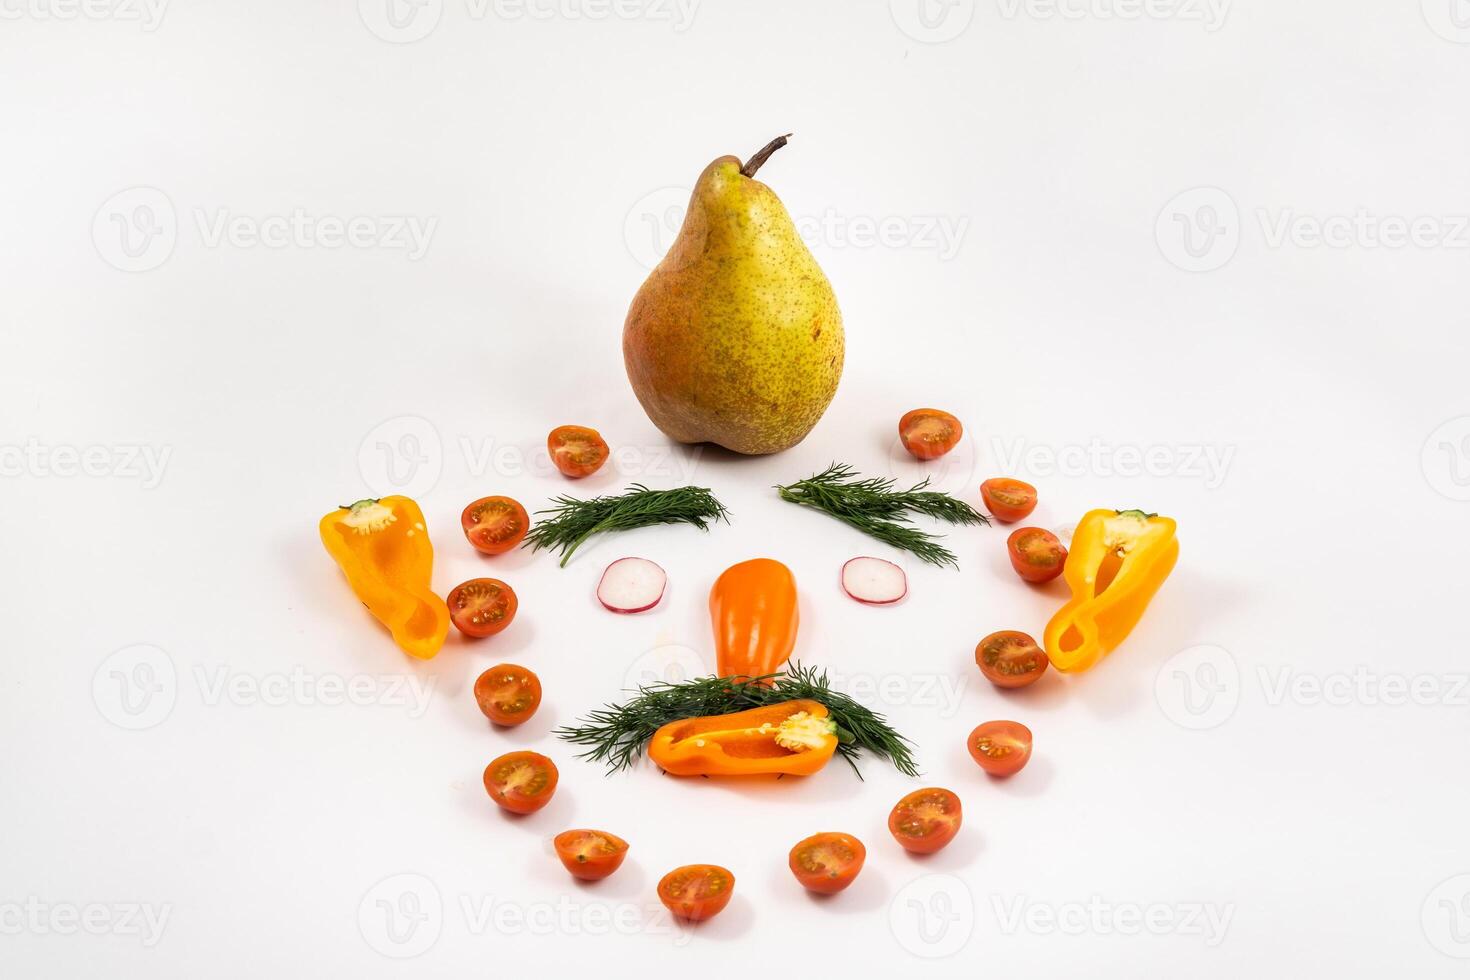 The face of a man made of sliced vegetables and a pear on his head on a white background photo